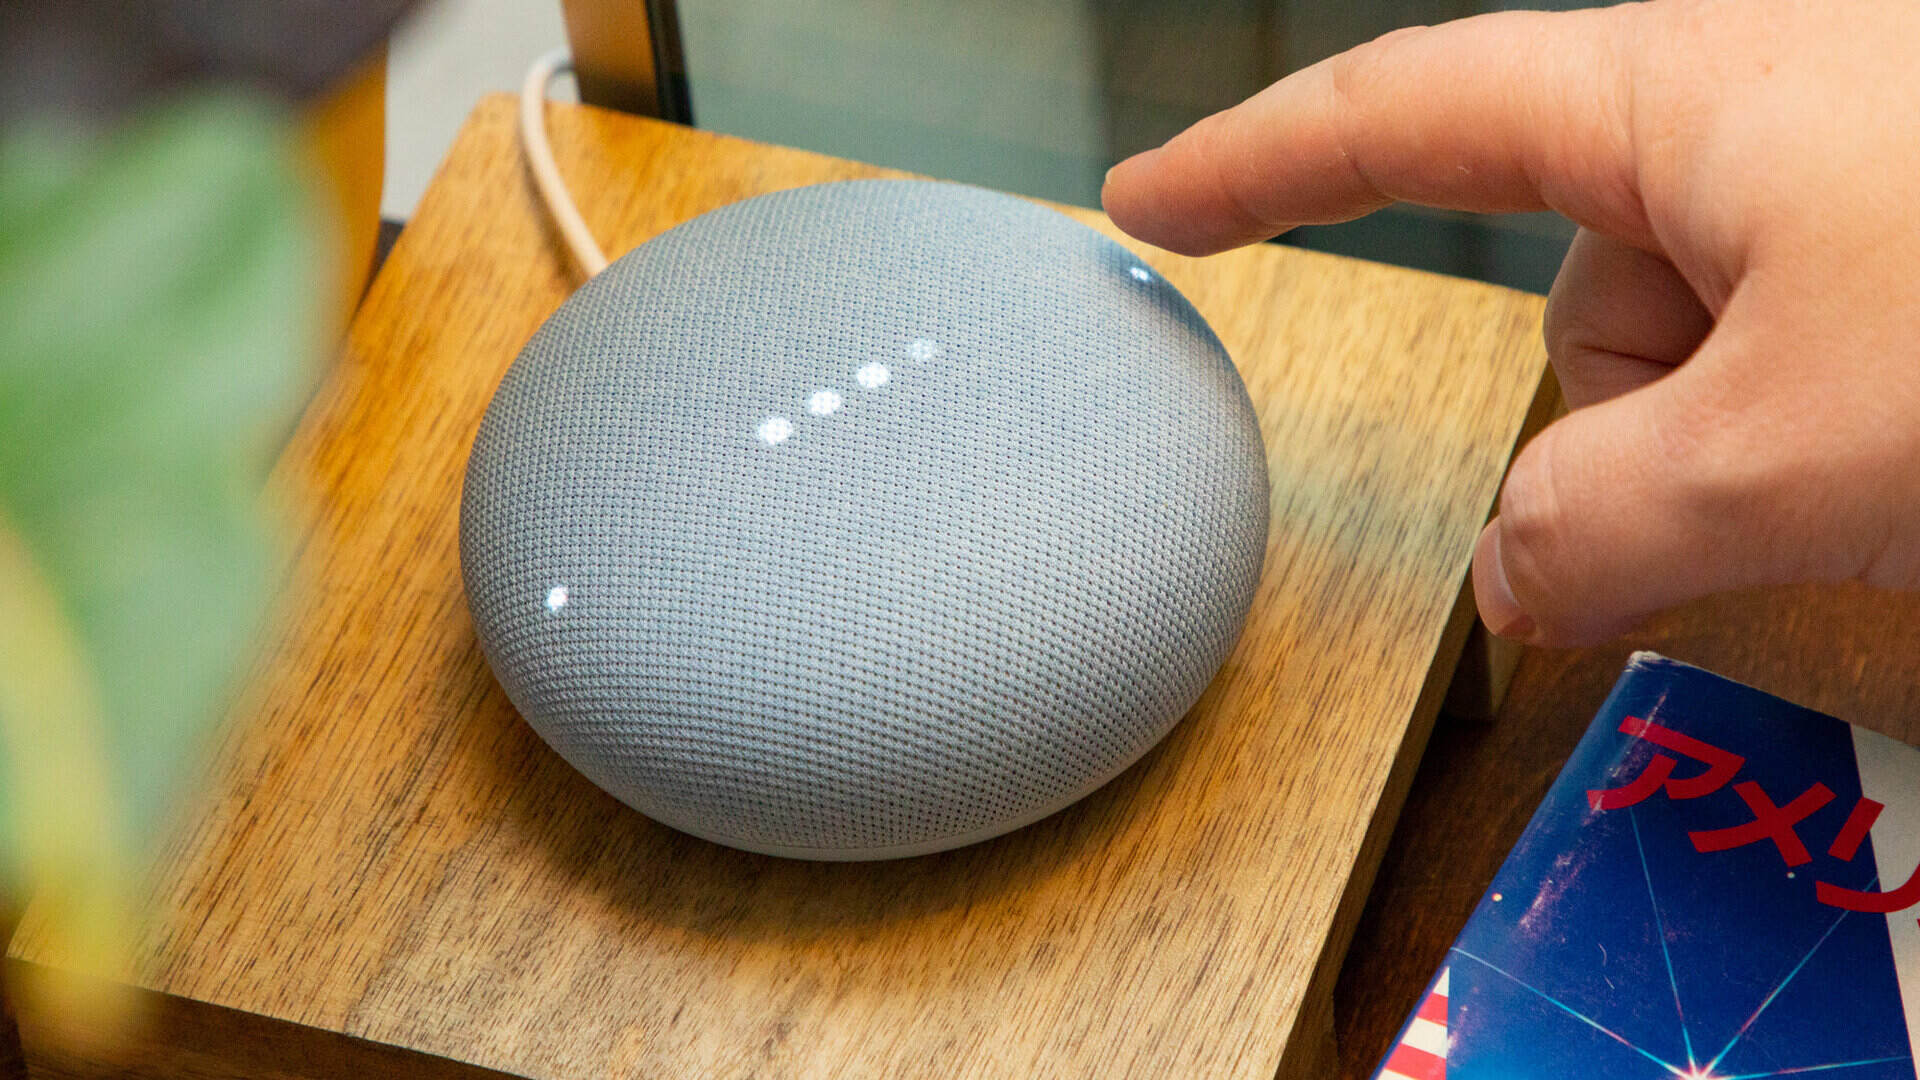 How To Change Wi-Fi In Google Home